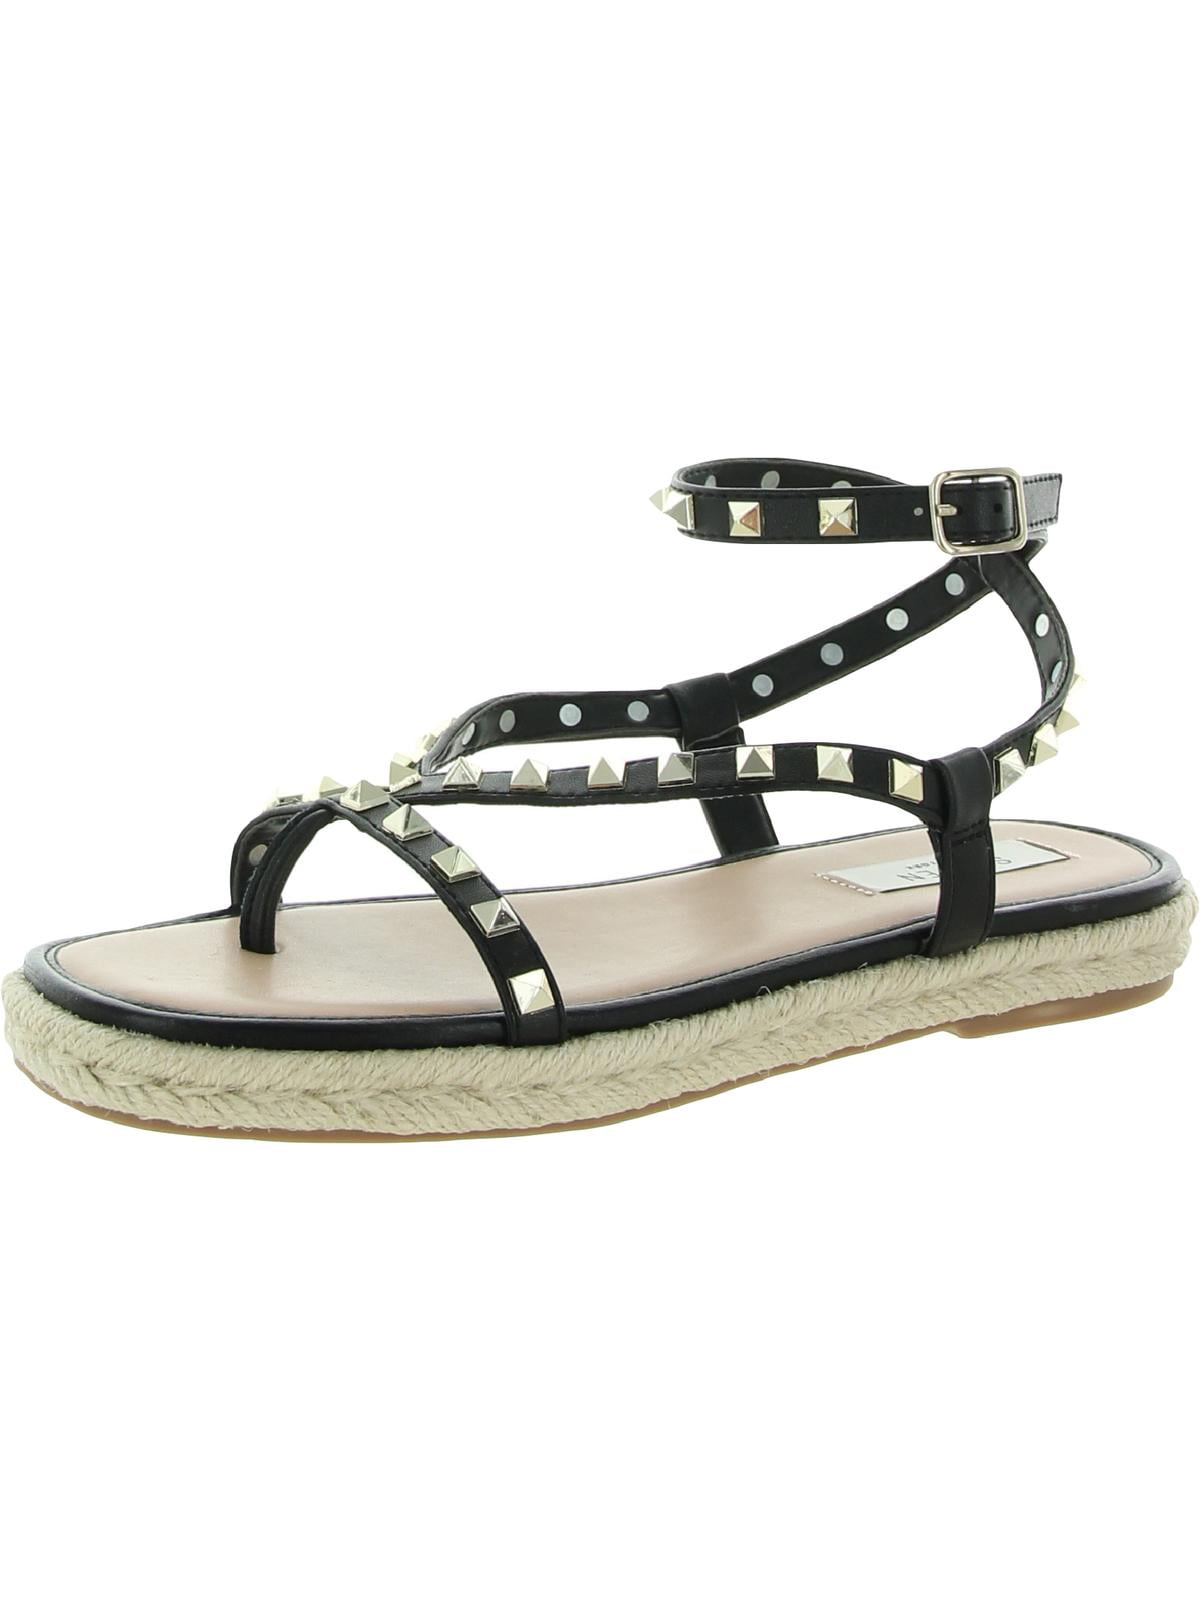 Steven New York Womens Summit Faux Leather Studded Flat Sandals